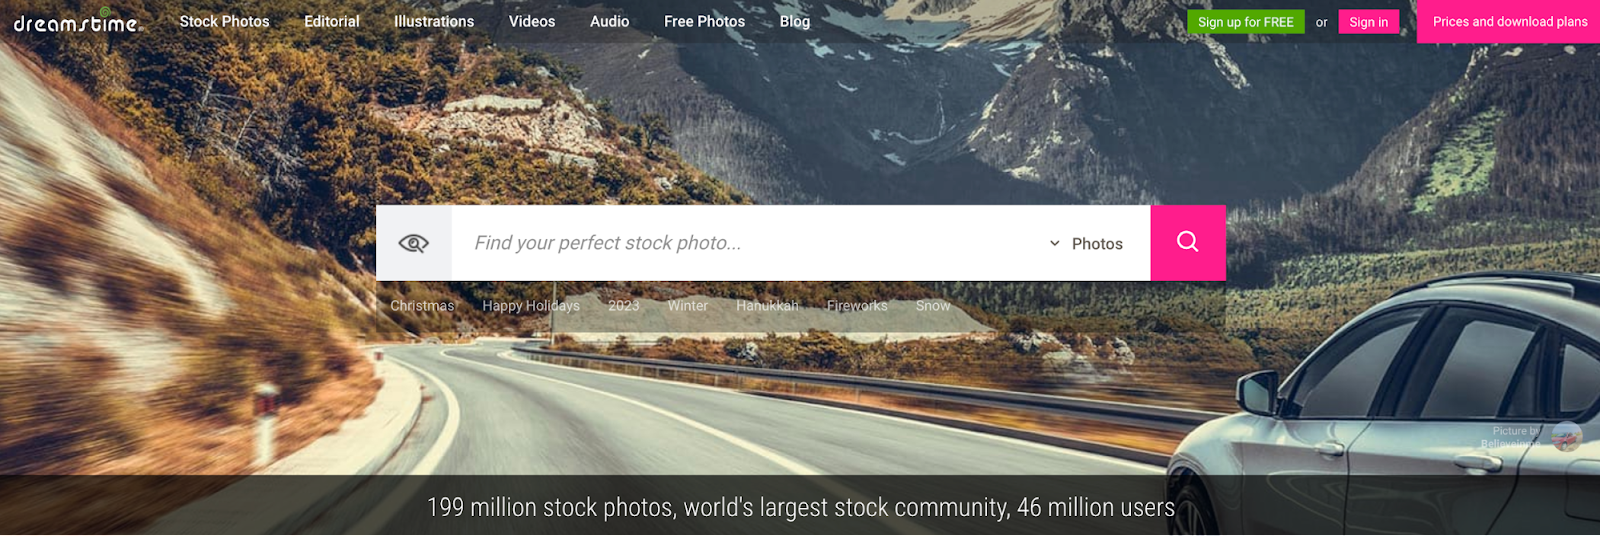 Dreamstime website with a photo search box overlaid on an image of a car driving through mountains.